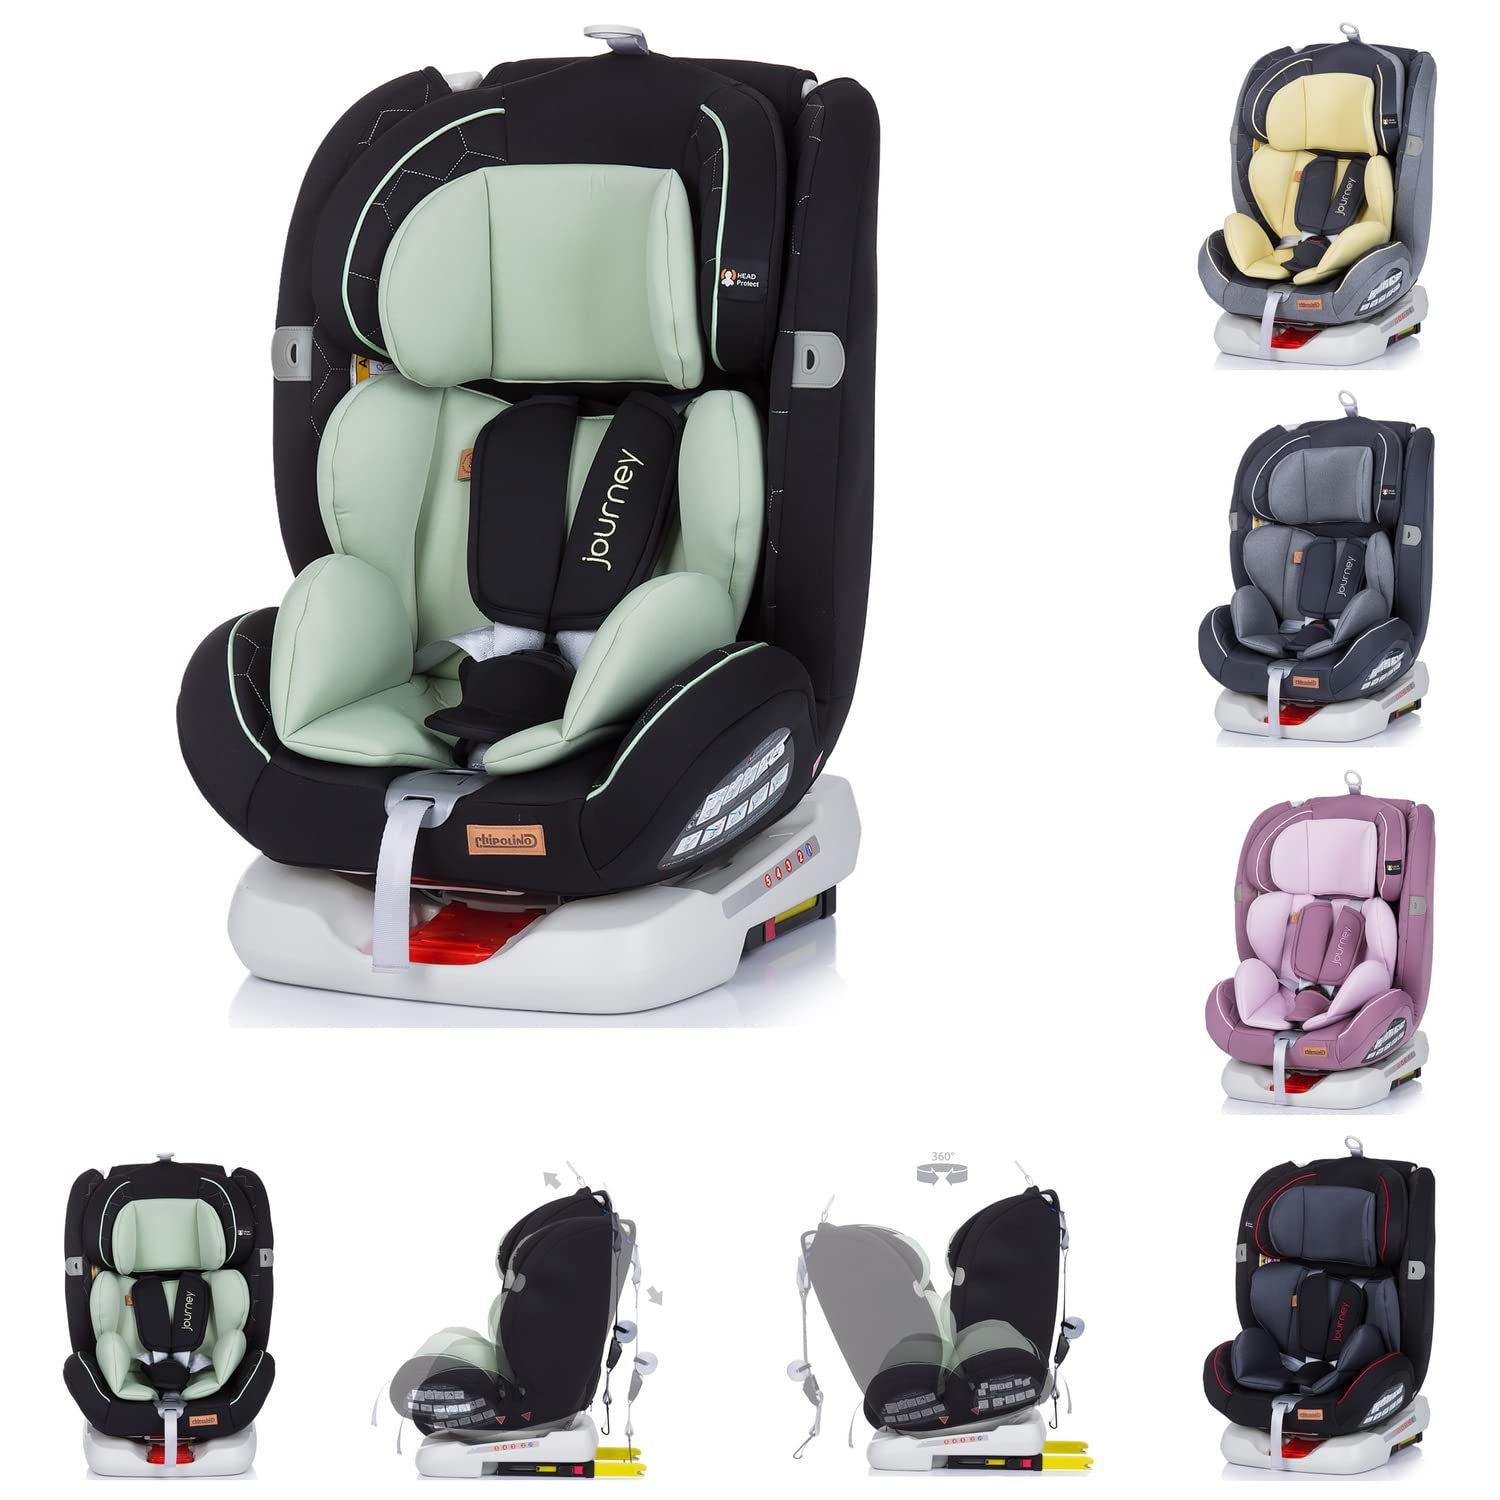 Chipolino, Journey Child Seat Group 0+/1/2/3 (0-36 kg) Isofix Top Tether Light Green